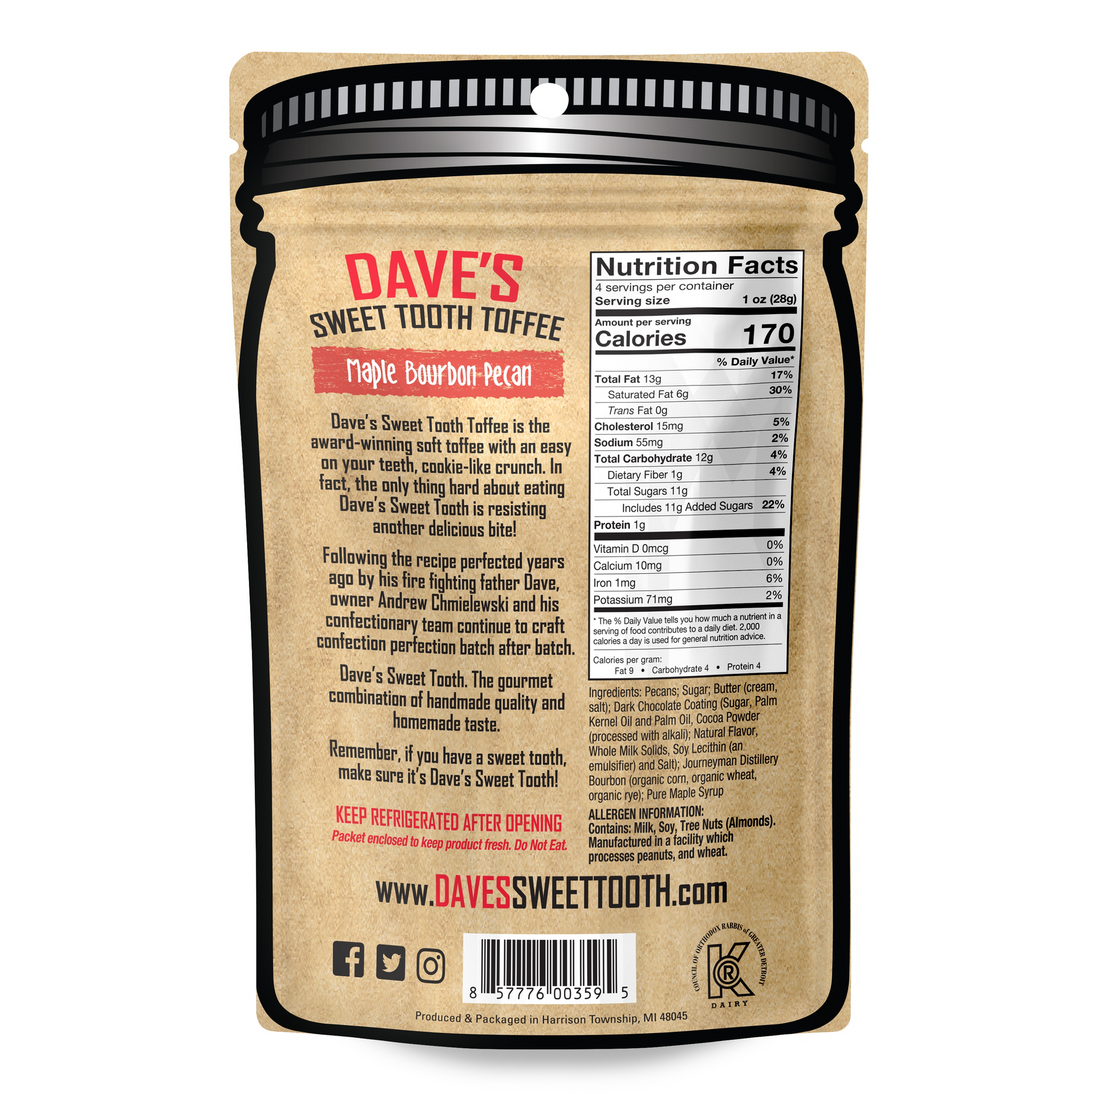 Dave's Sweet Tooth Toffee - Maple Bourbon Pecan